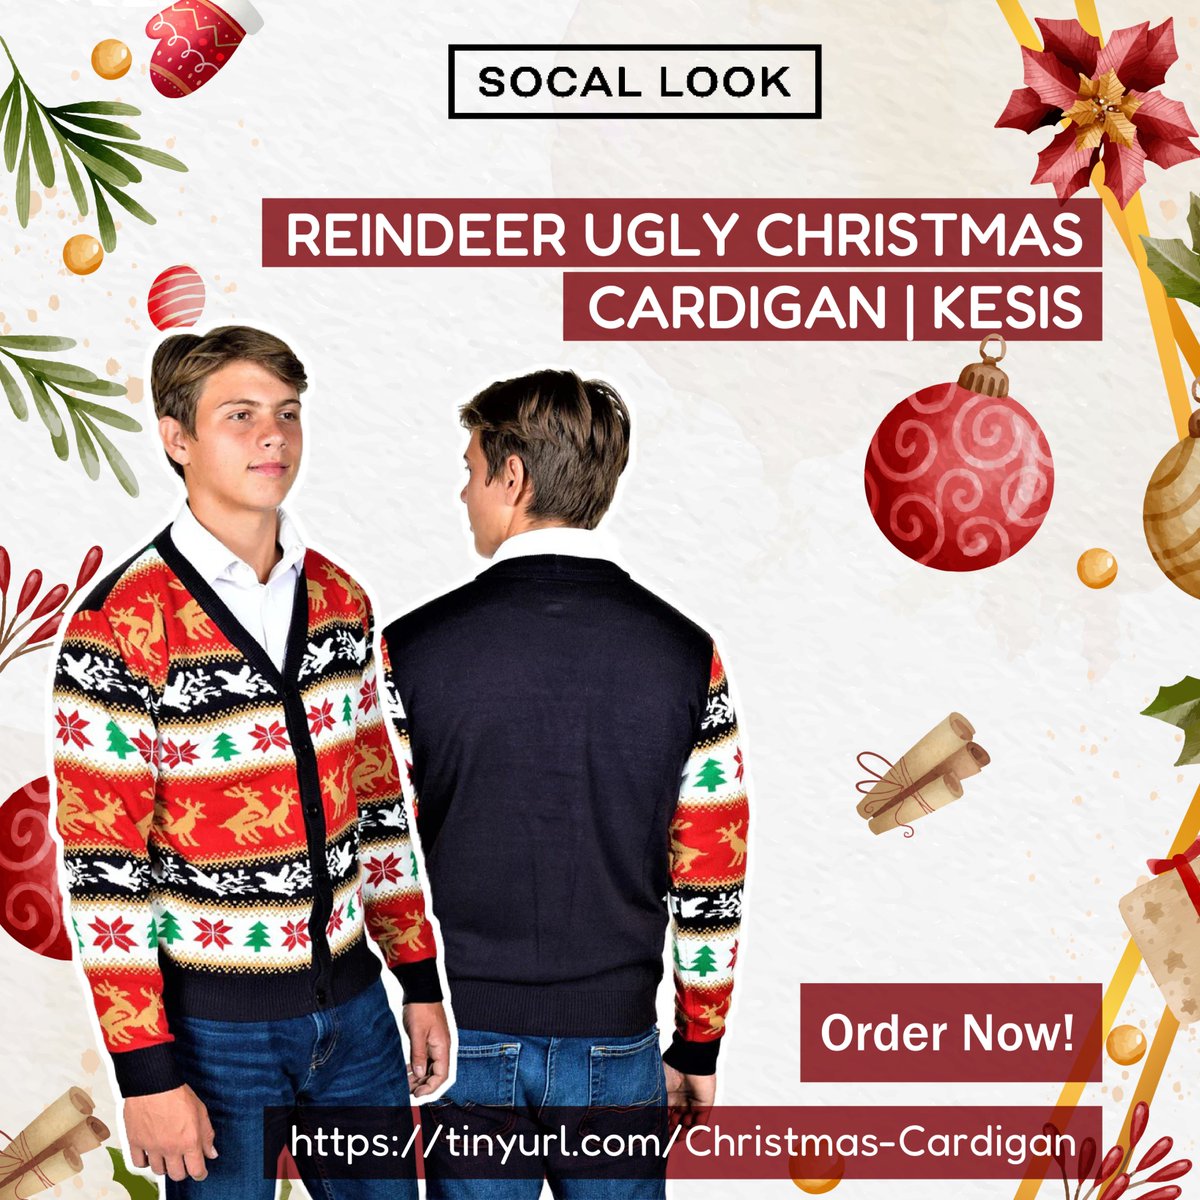 🦌 Get into the festive spirit with our 'Reindeer Ugly Christmas Cardigan'! 🎄 It's the perfect way to sleigh your holiday outfit game. ❄️ 🎉 🛍️ Shop now to rock that reindeer chic and spread Christmas cheer! tinyurl.com/Christmas-Card… #UglyChristmasSweater #FestiveFashion #kesis